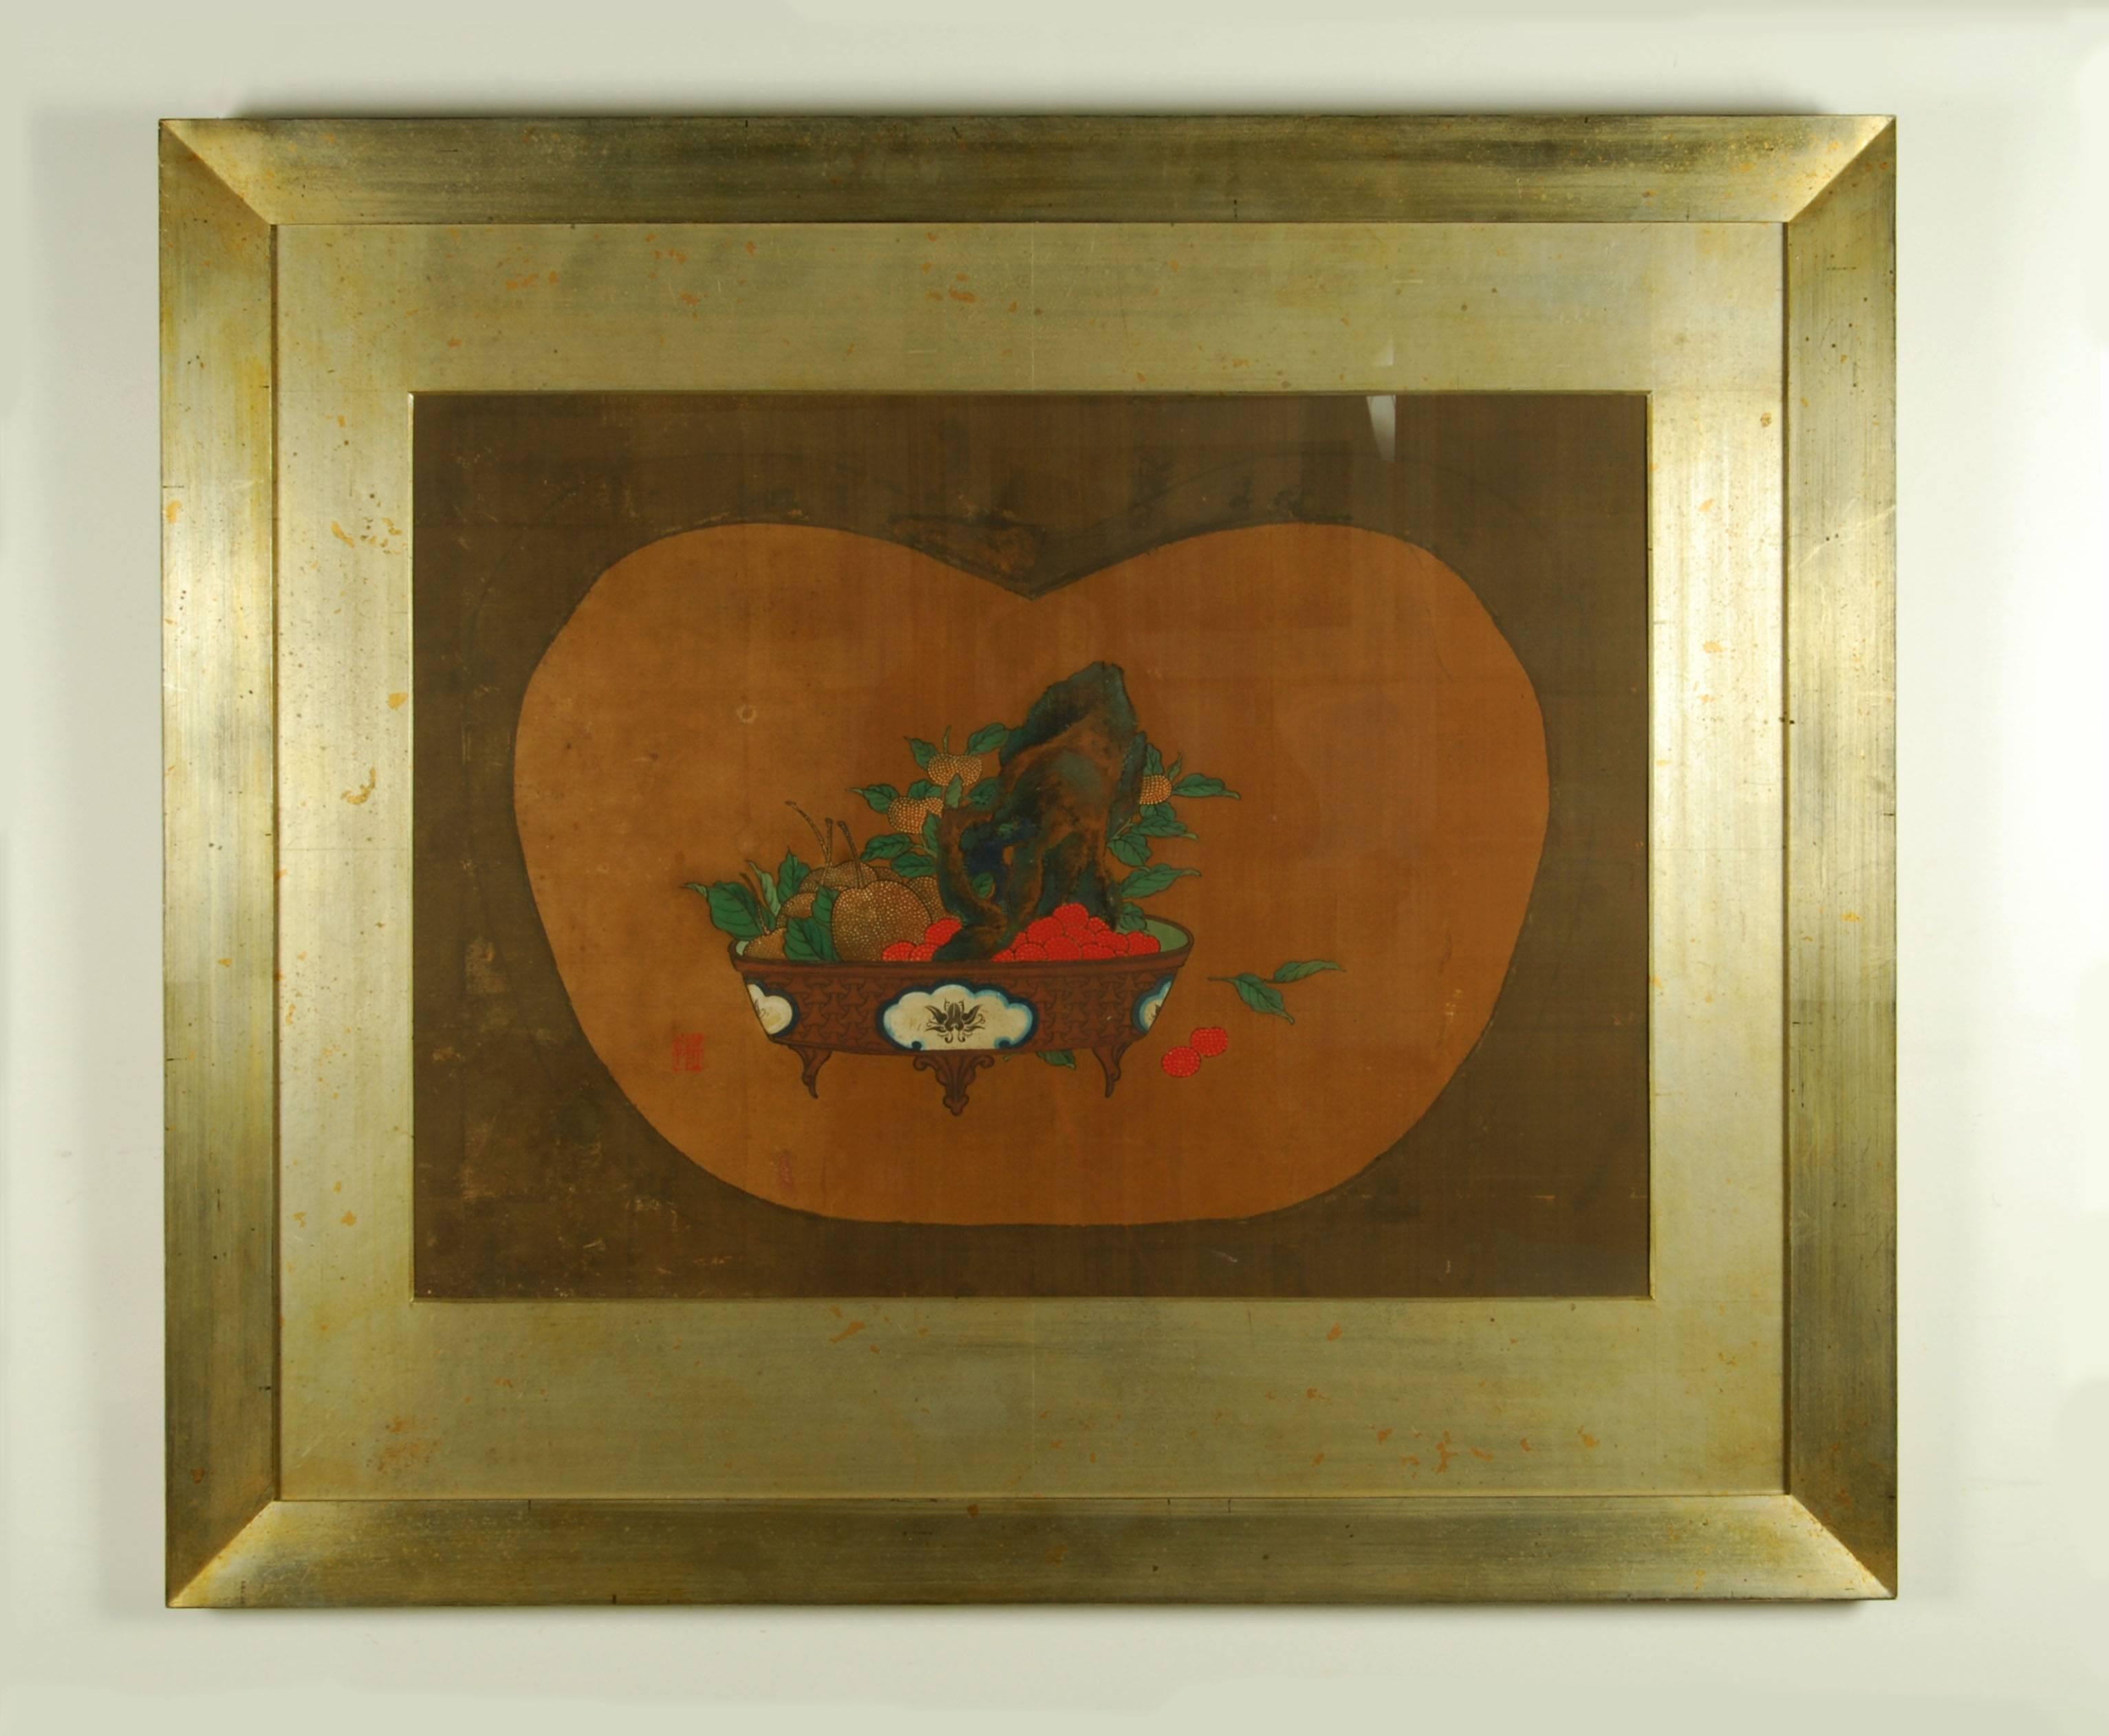 Pair of antique Japanese Nagasaki School paintings by Yanagisawa Kien (1704-1758), depicting classical ikebana flower arrangements. Each painted on silk in mineral pigments and bearing Kien's signature and seals.

Dimensions: (framed) H 73 cm x W